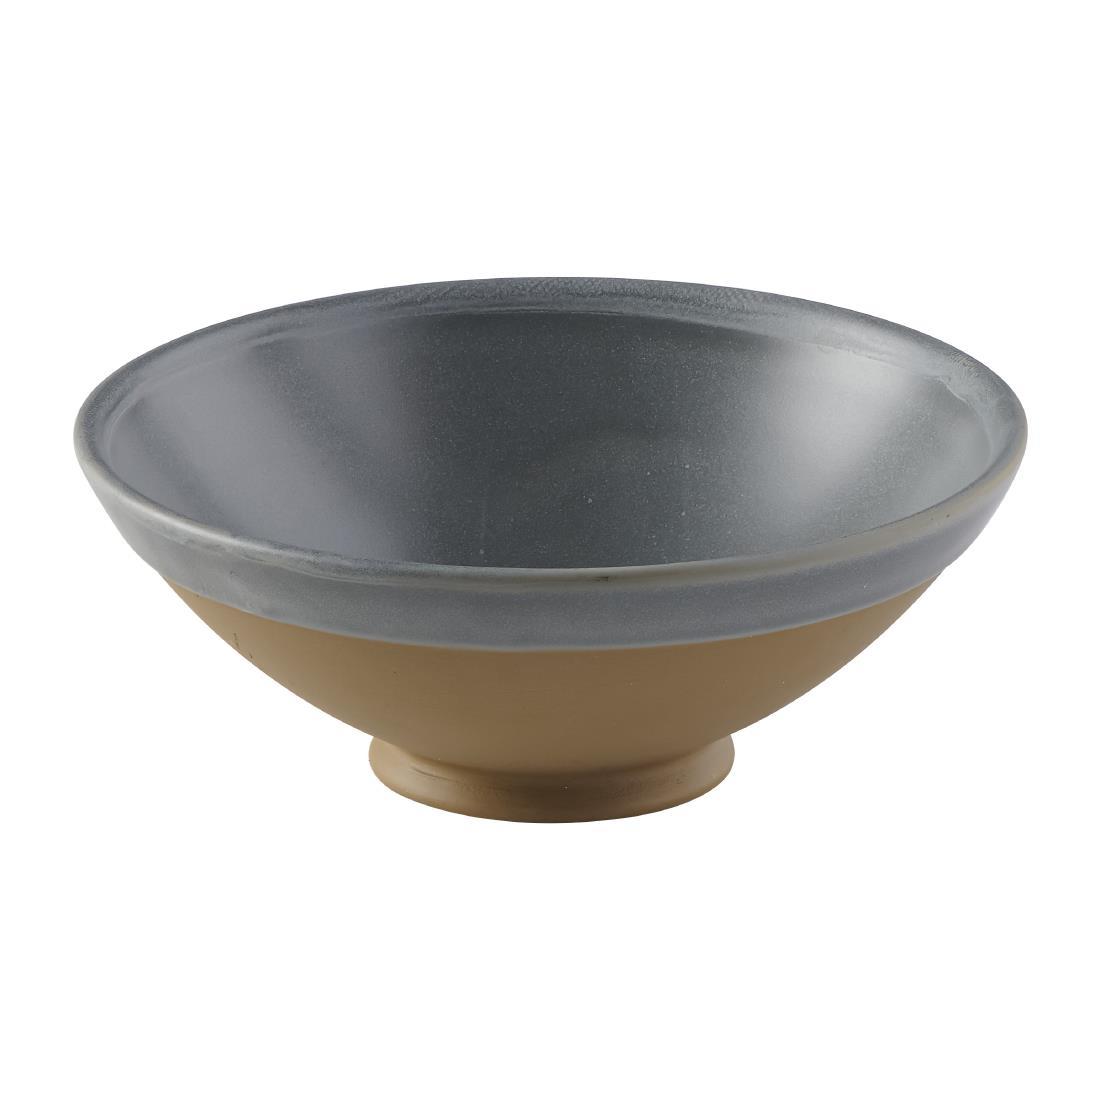 Churchill Emerge Seattle Footed Bowl Grey 200mm (Pack of 6) - FS961  - 2